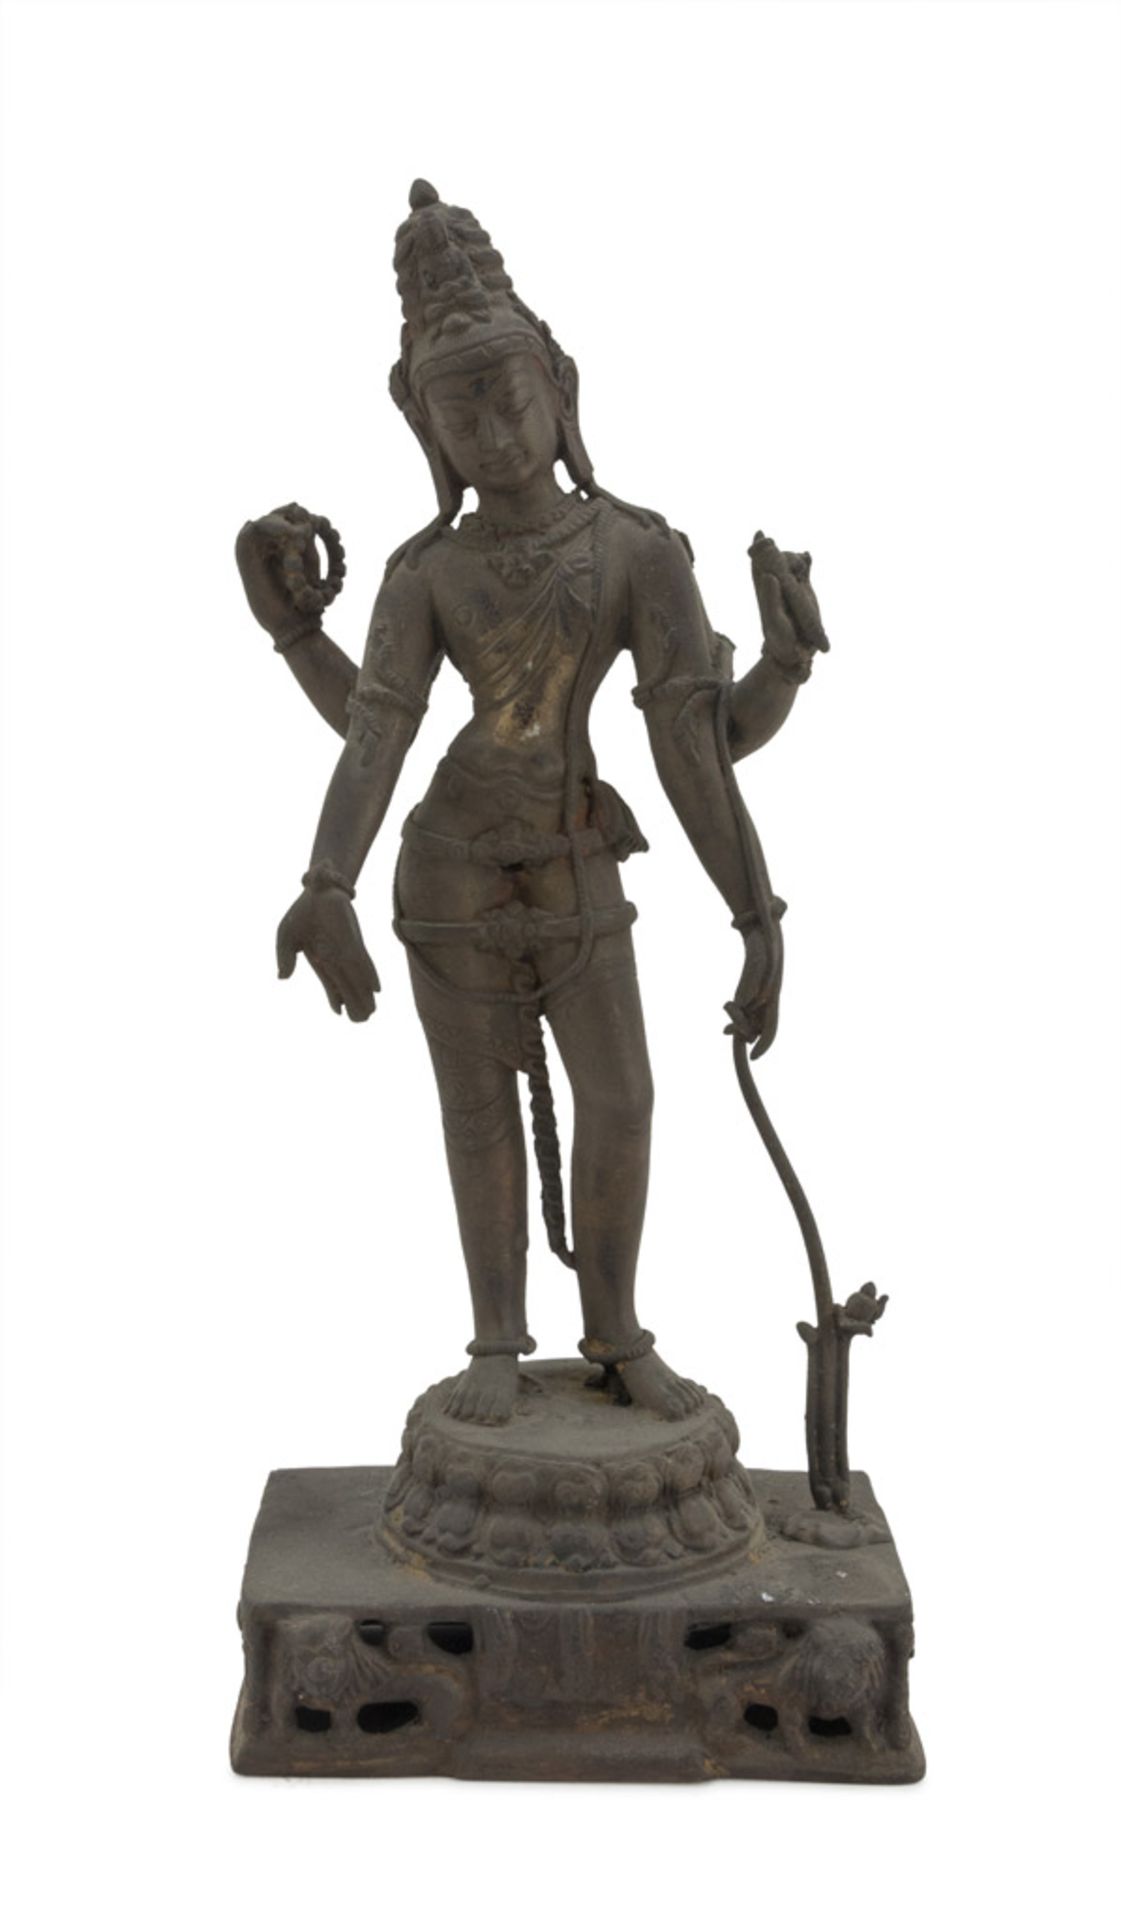 BRONZE SCULPTURE WITH BURNISHED PATINA, INDIA EARLY 20TH CENTURY representing Shiva supported by a